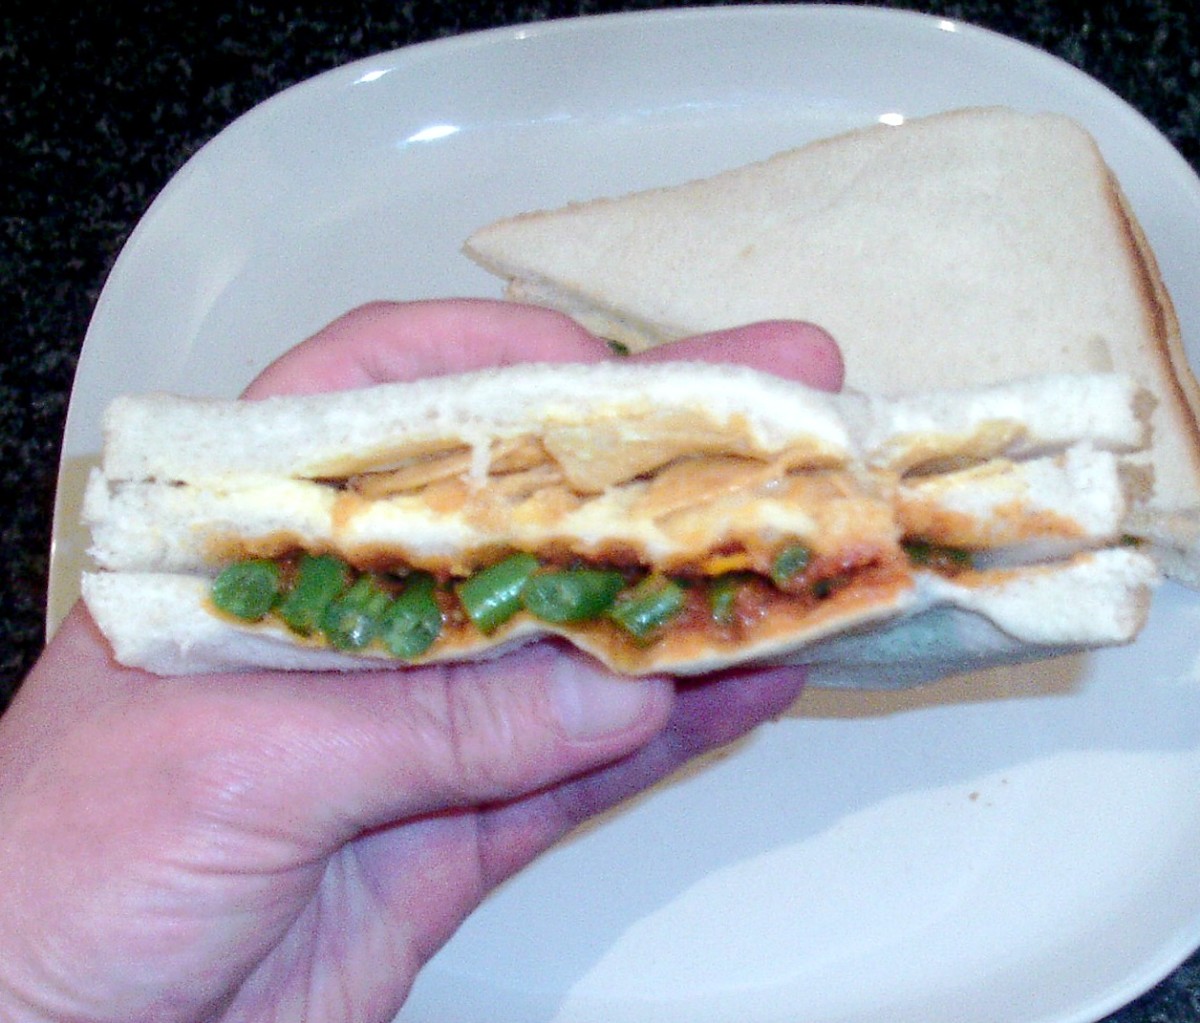 Spicy beans in tomato sauce in the bottom layer and cheese and onion crisps in the top layer sandwich